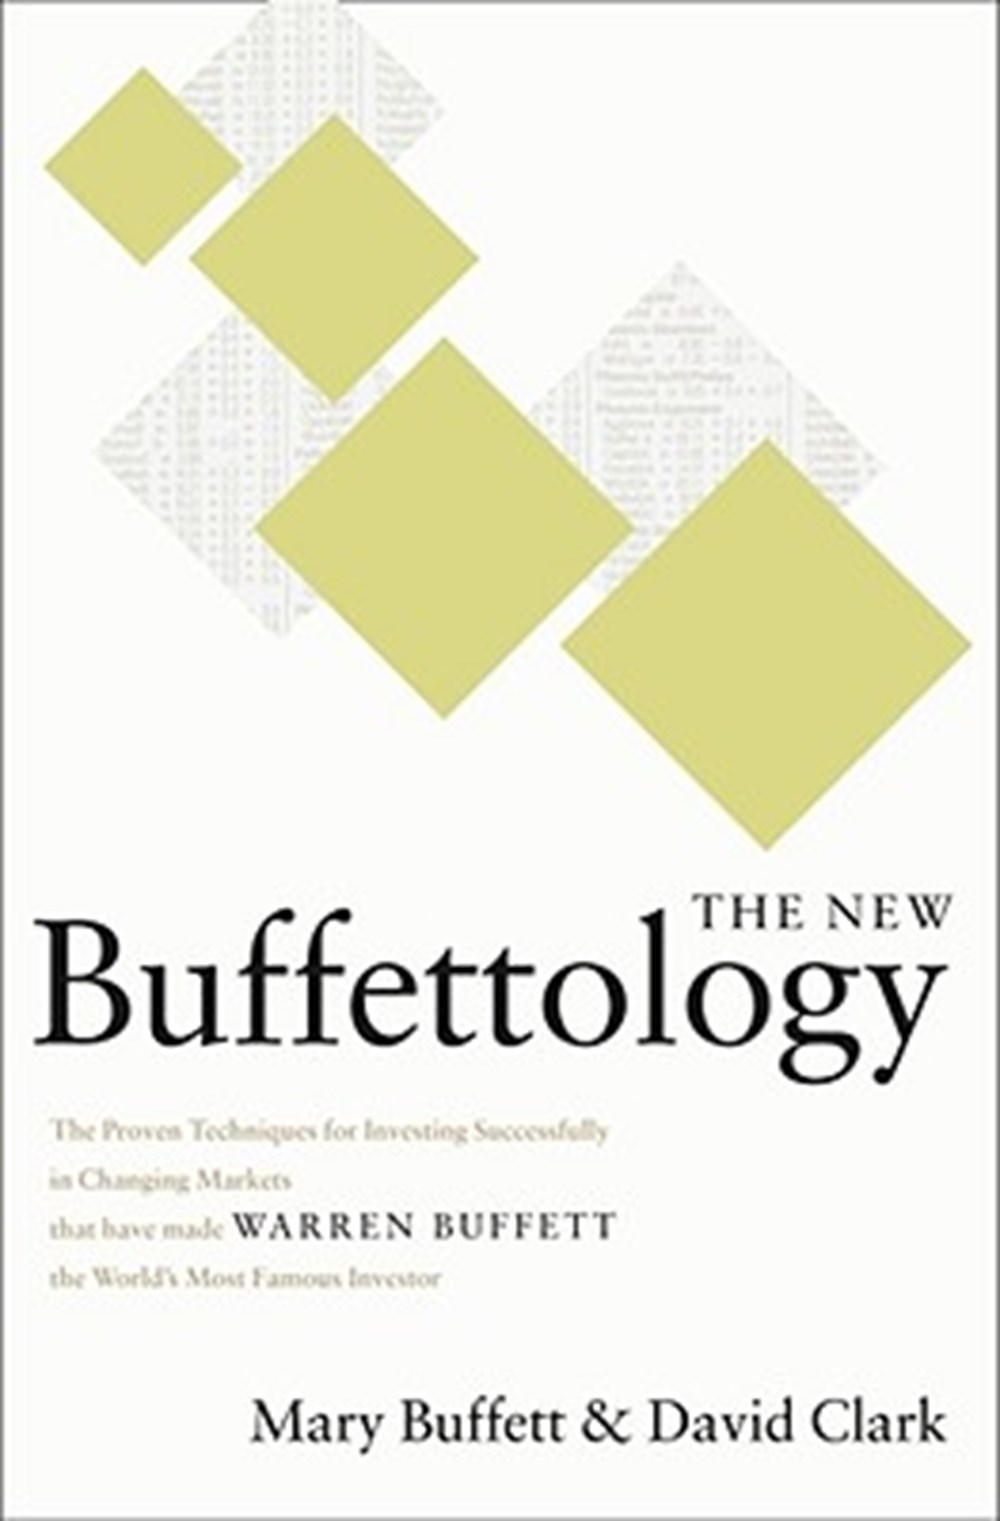 New Buffettology How Warren Buffett Got and Stayed Rich in Markets Like This and How You Can Too!